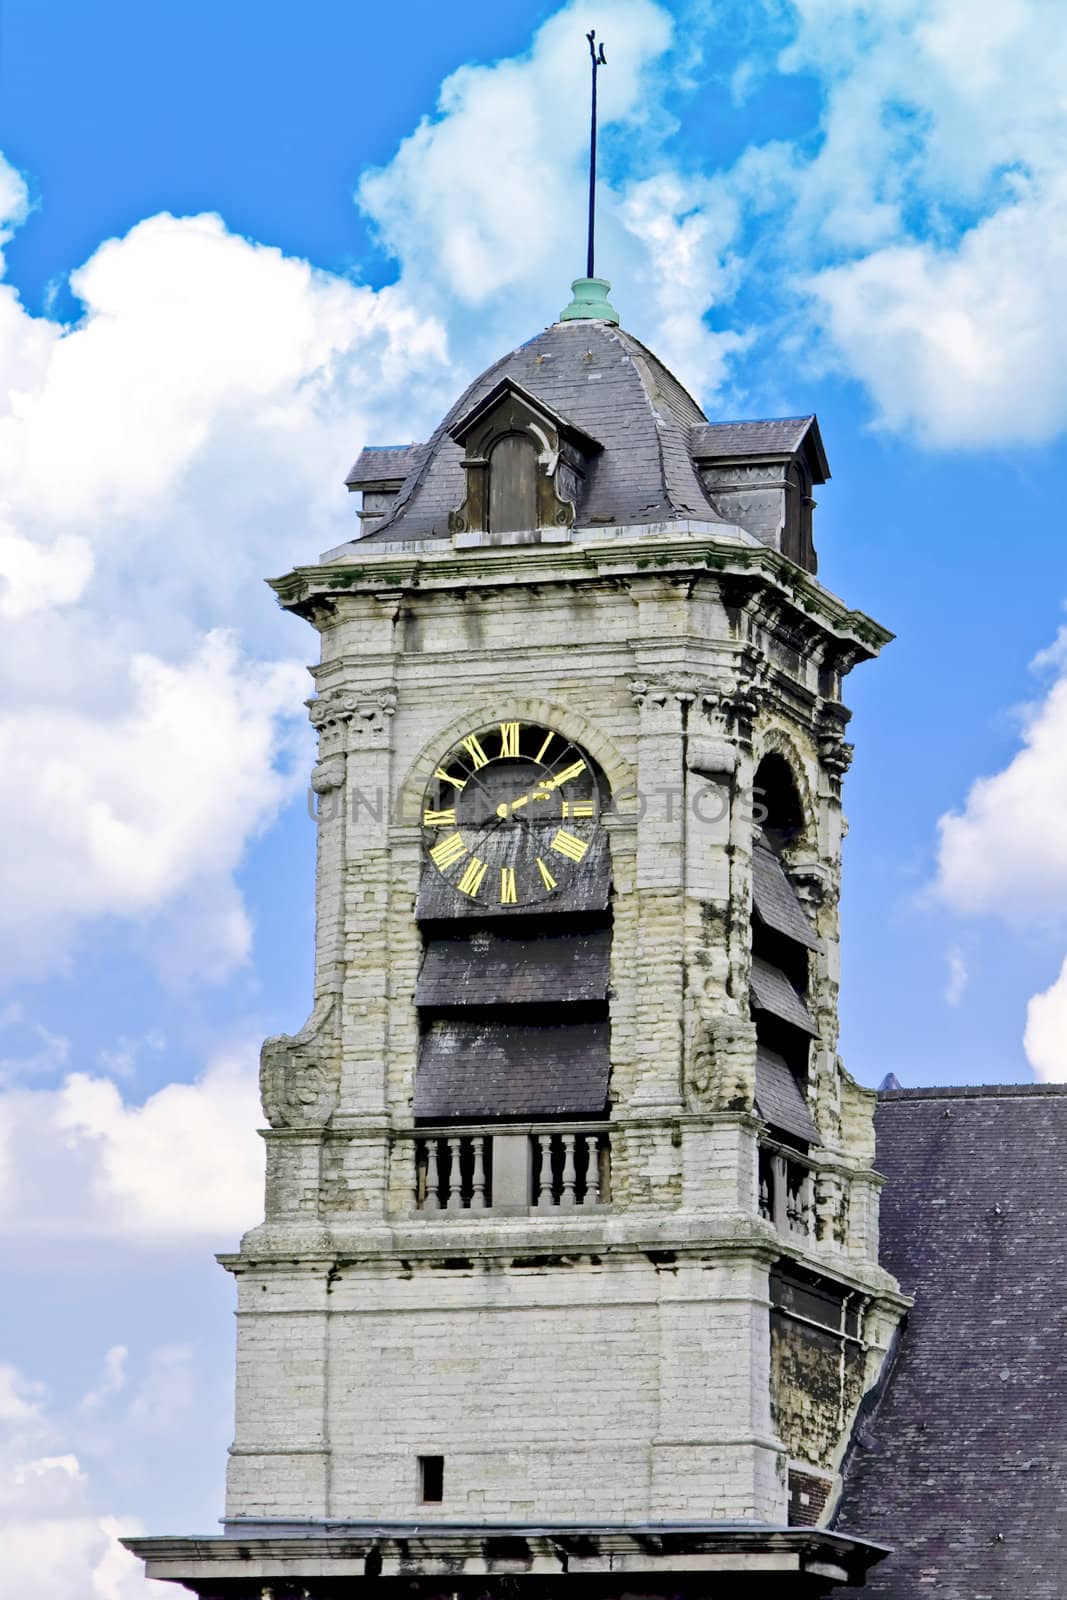 Clock tower on sky background